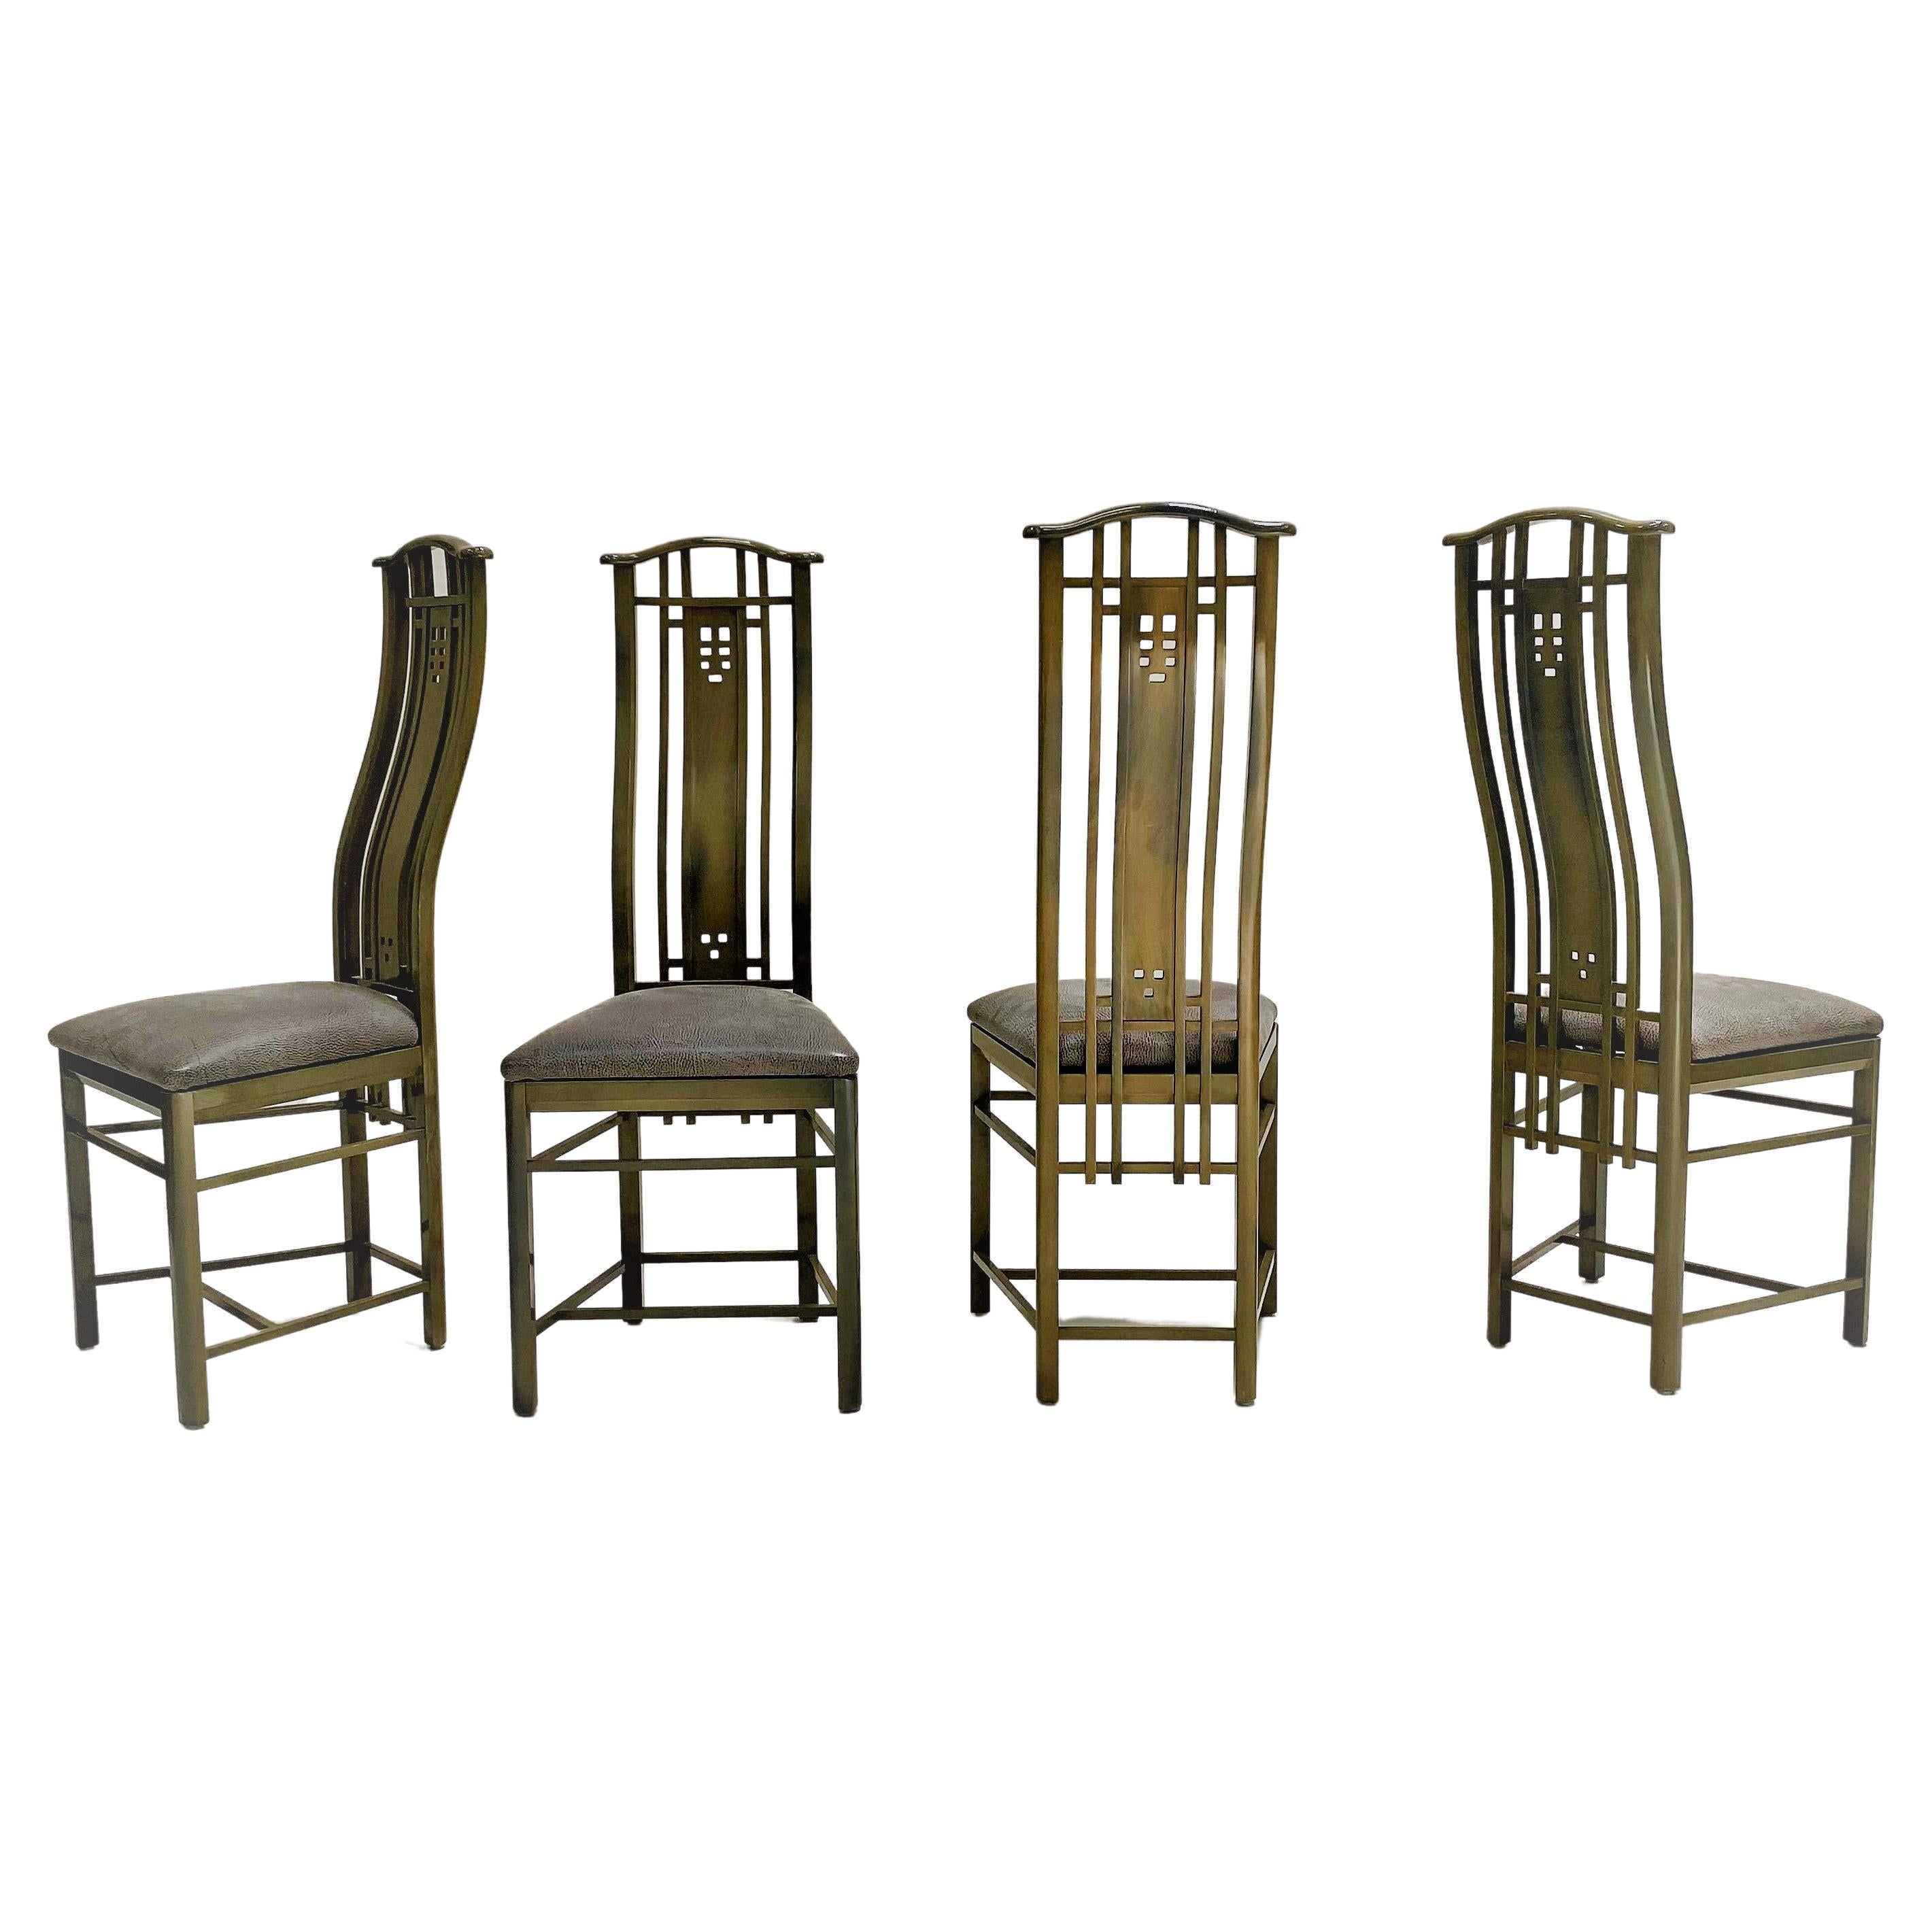 Set of 4 High Back Lacquered Dining Chairs by Umberto Asnago for Giorgetti, 1980